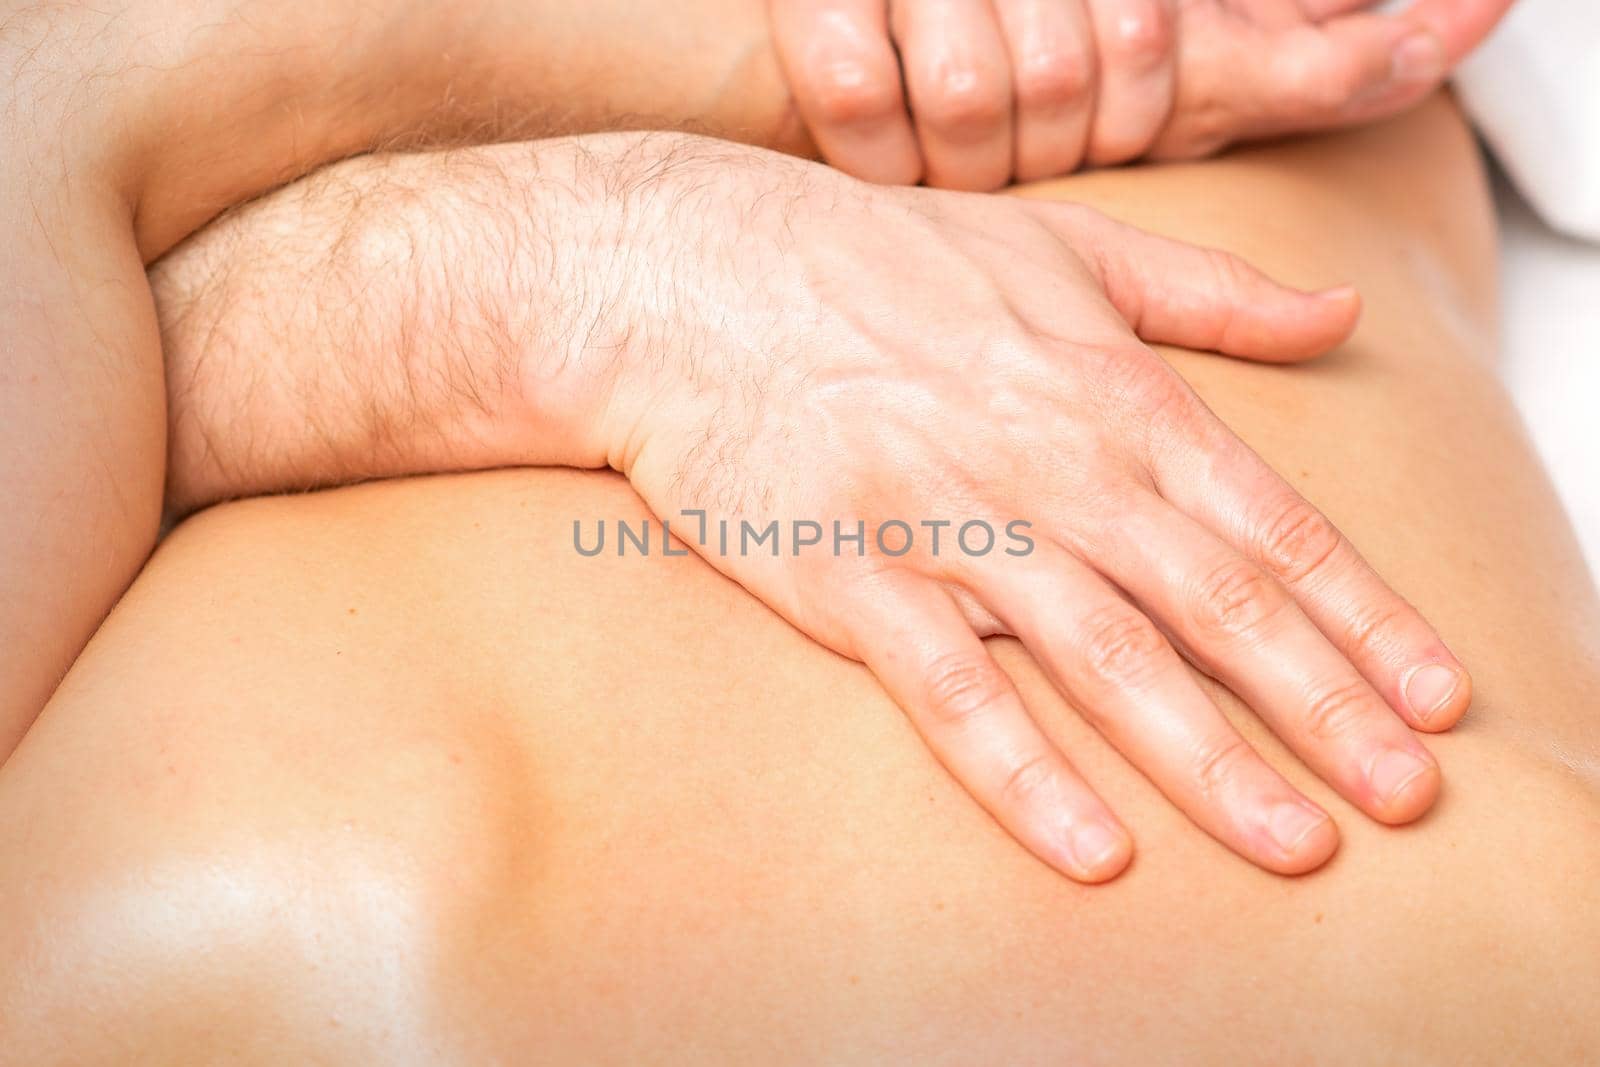 A male physiotherapist stretches the arms on the back of a man lying down, close up